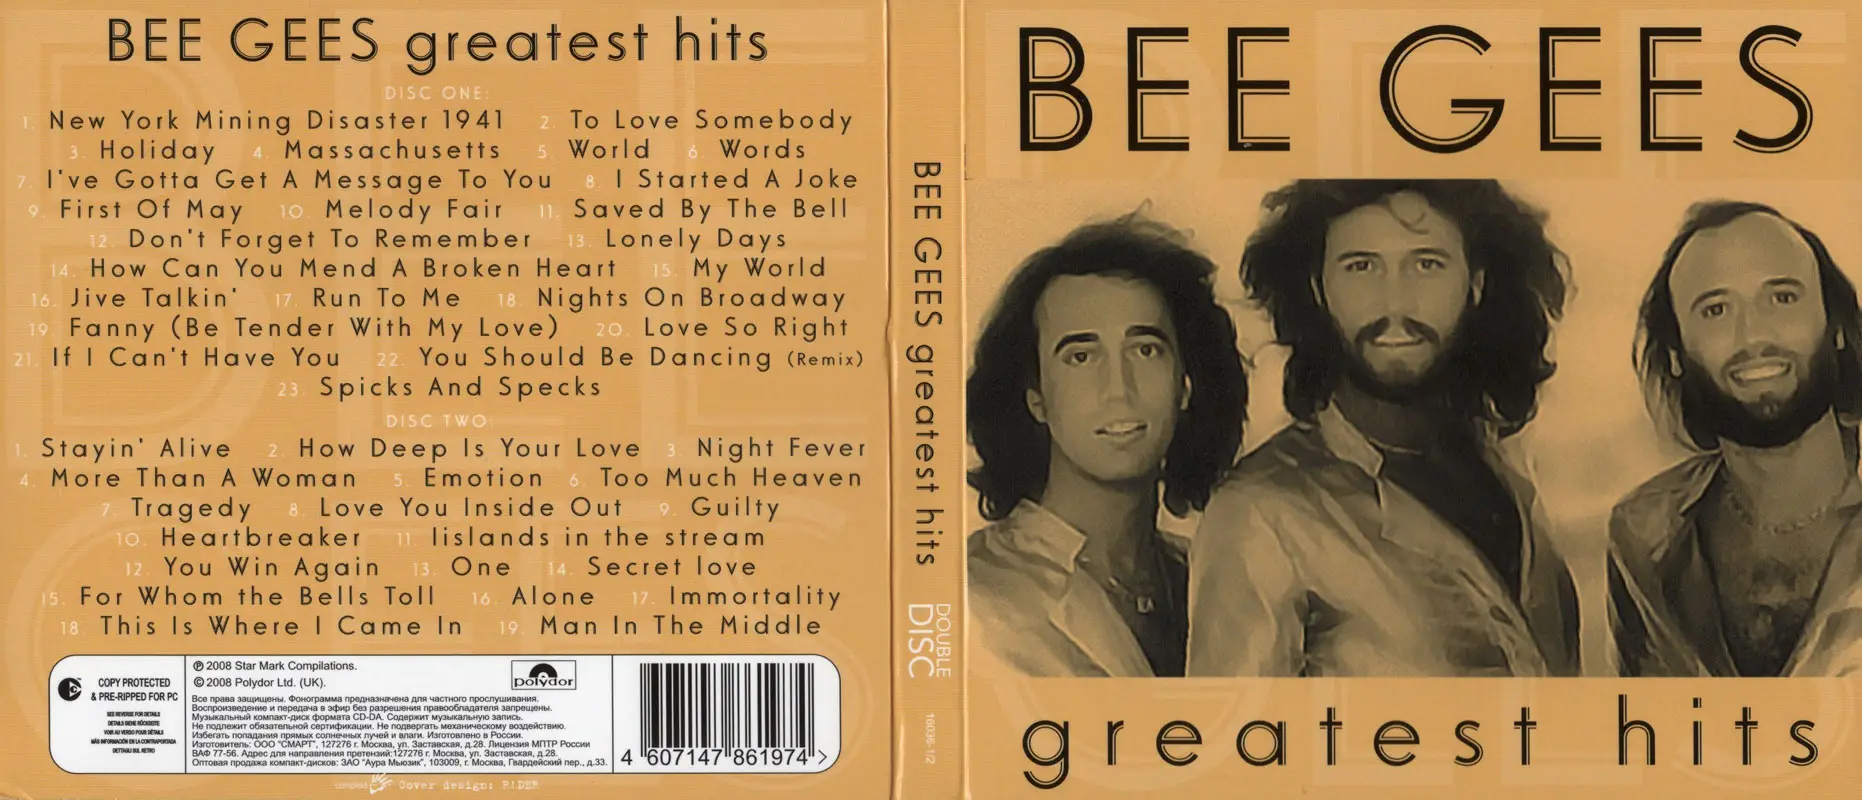 bee gees greatest hits tracklist